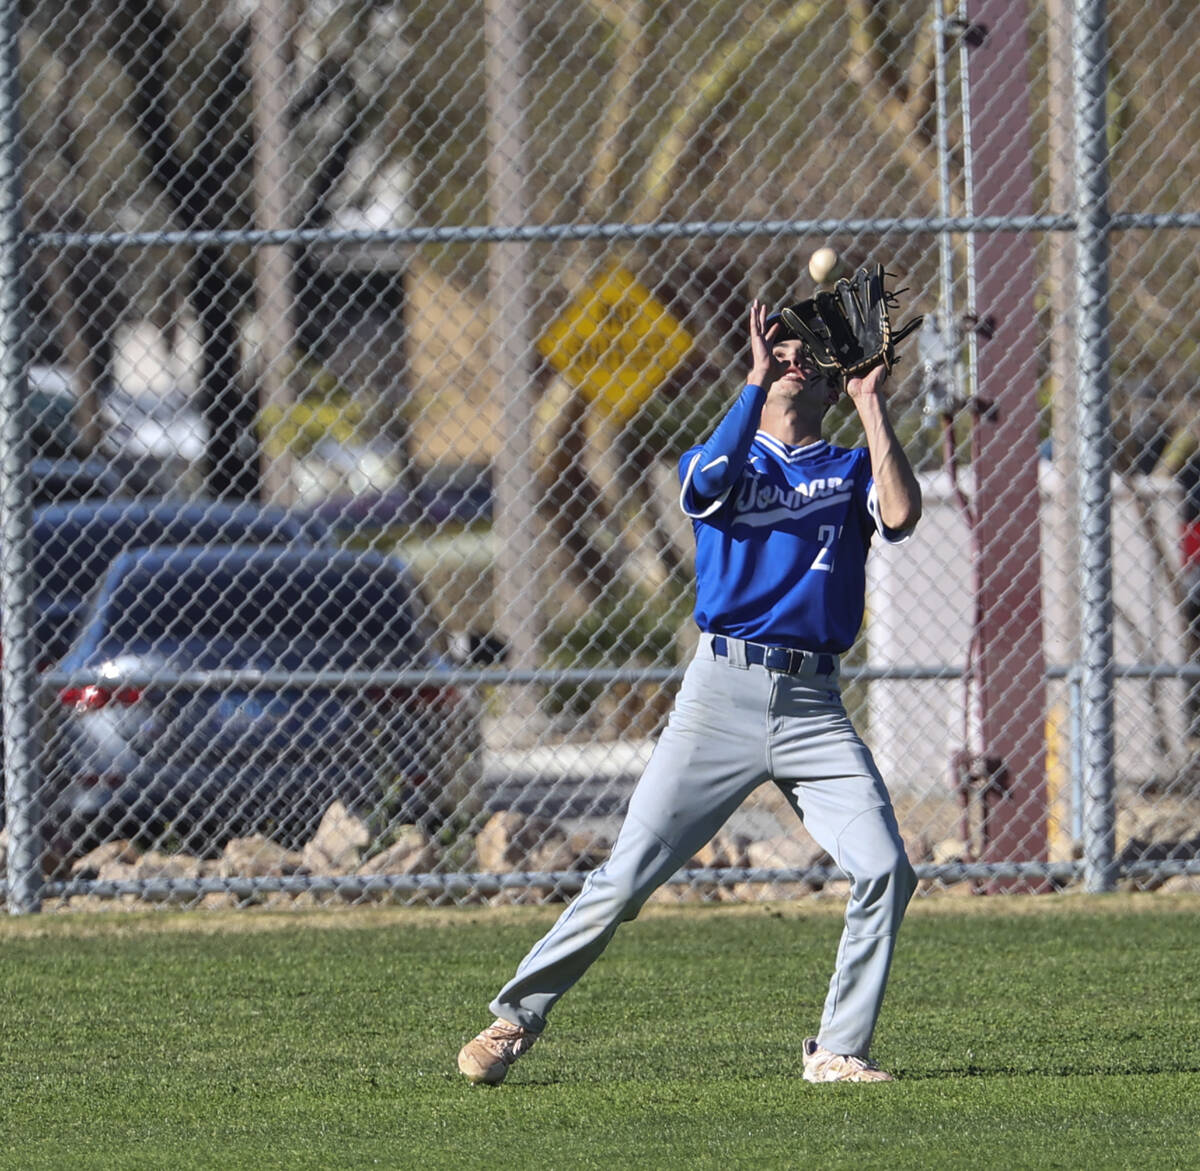 Bishop Gorman outfielder Tommy Rose (23) catches a fly ball from Cimarron-Memorial during a bas ...